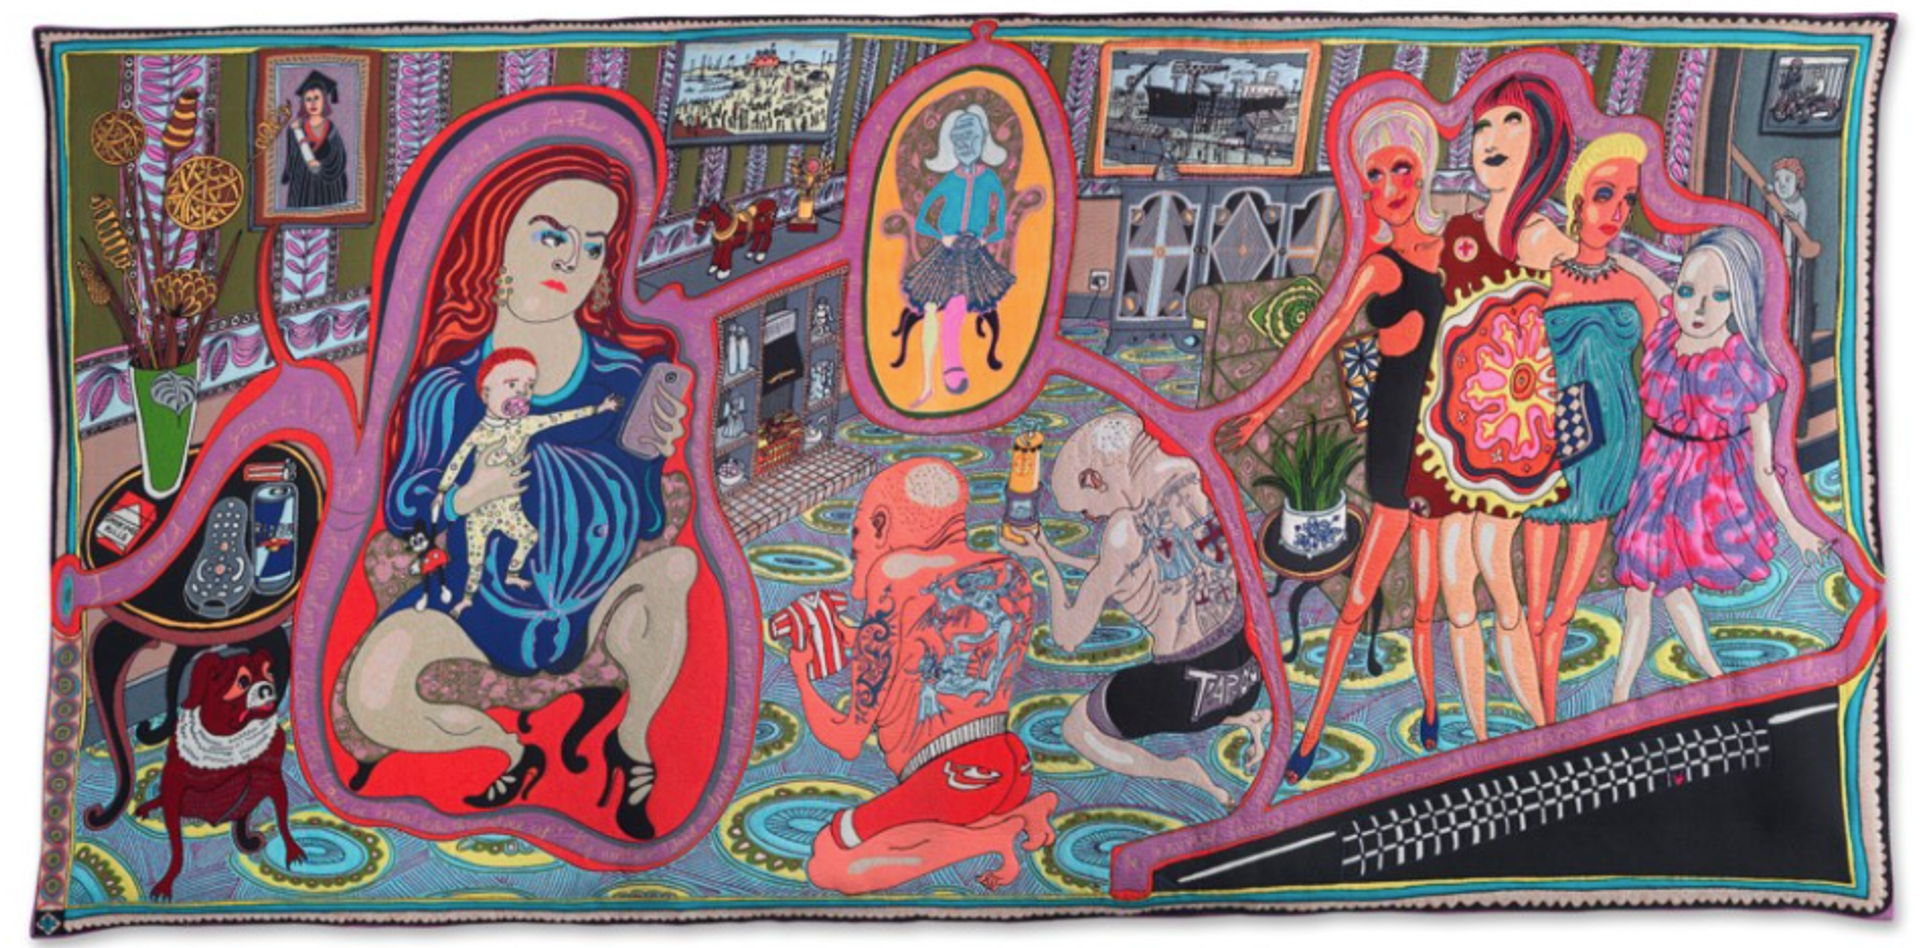 A detailed, colorful tapestry by Grayson Perry, depicting a vibrant domestic scene with characters engaged in various activities, including two muscular men in athletic wear. The artwork is set against a backdrop that combines household objects with traditional tapestry motifs.